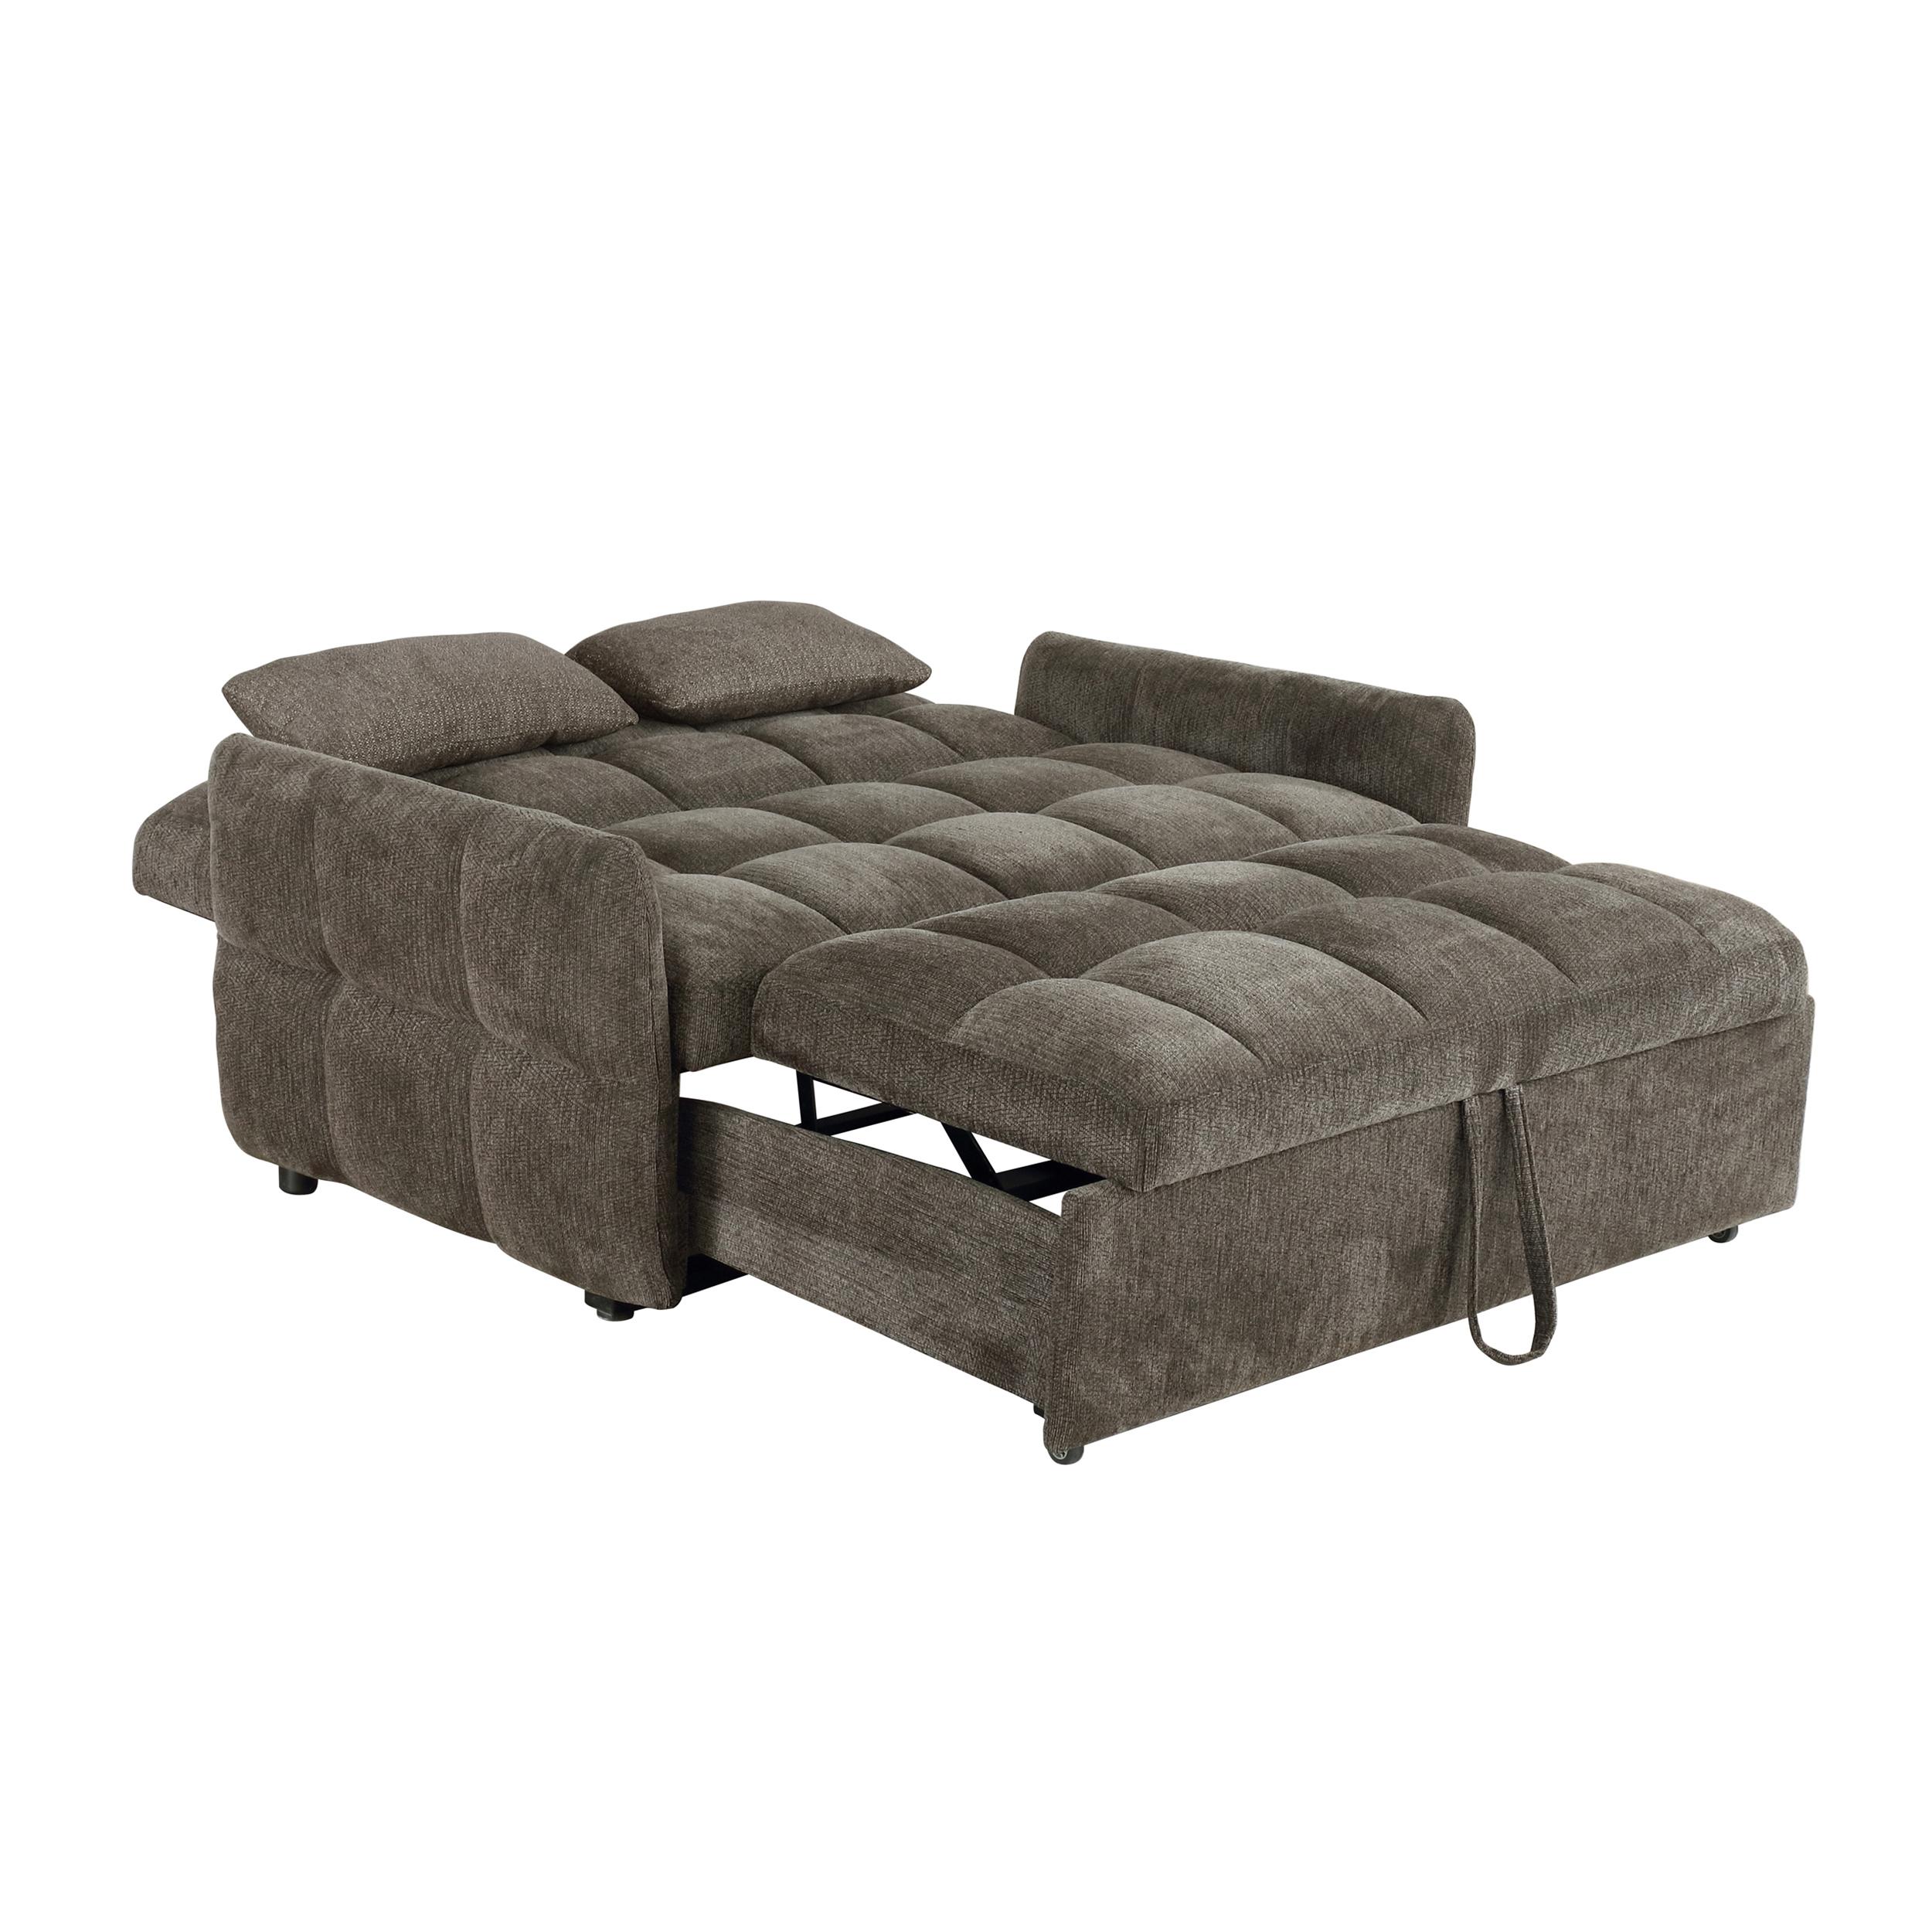 

    
Coaster 508308 Cotswold Sleeper Sofa Bed Brown 508308
